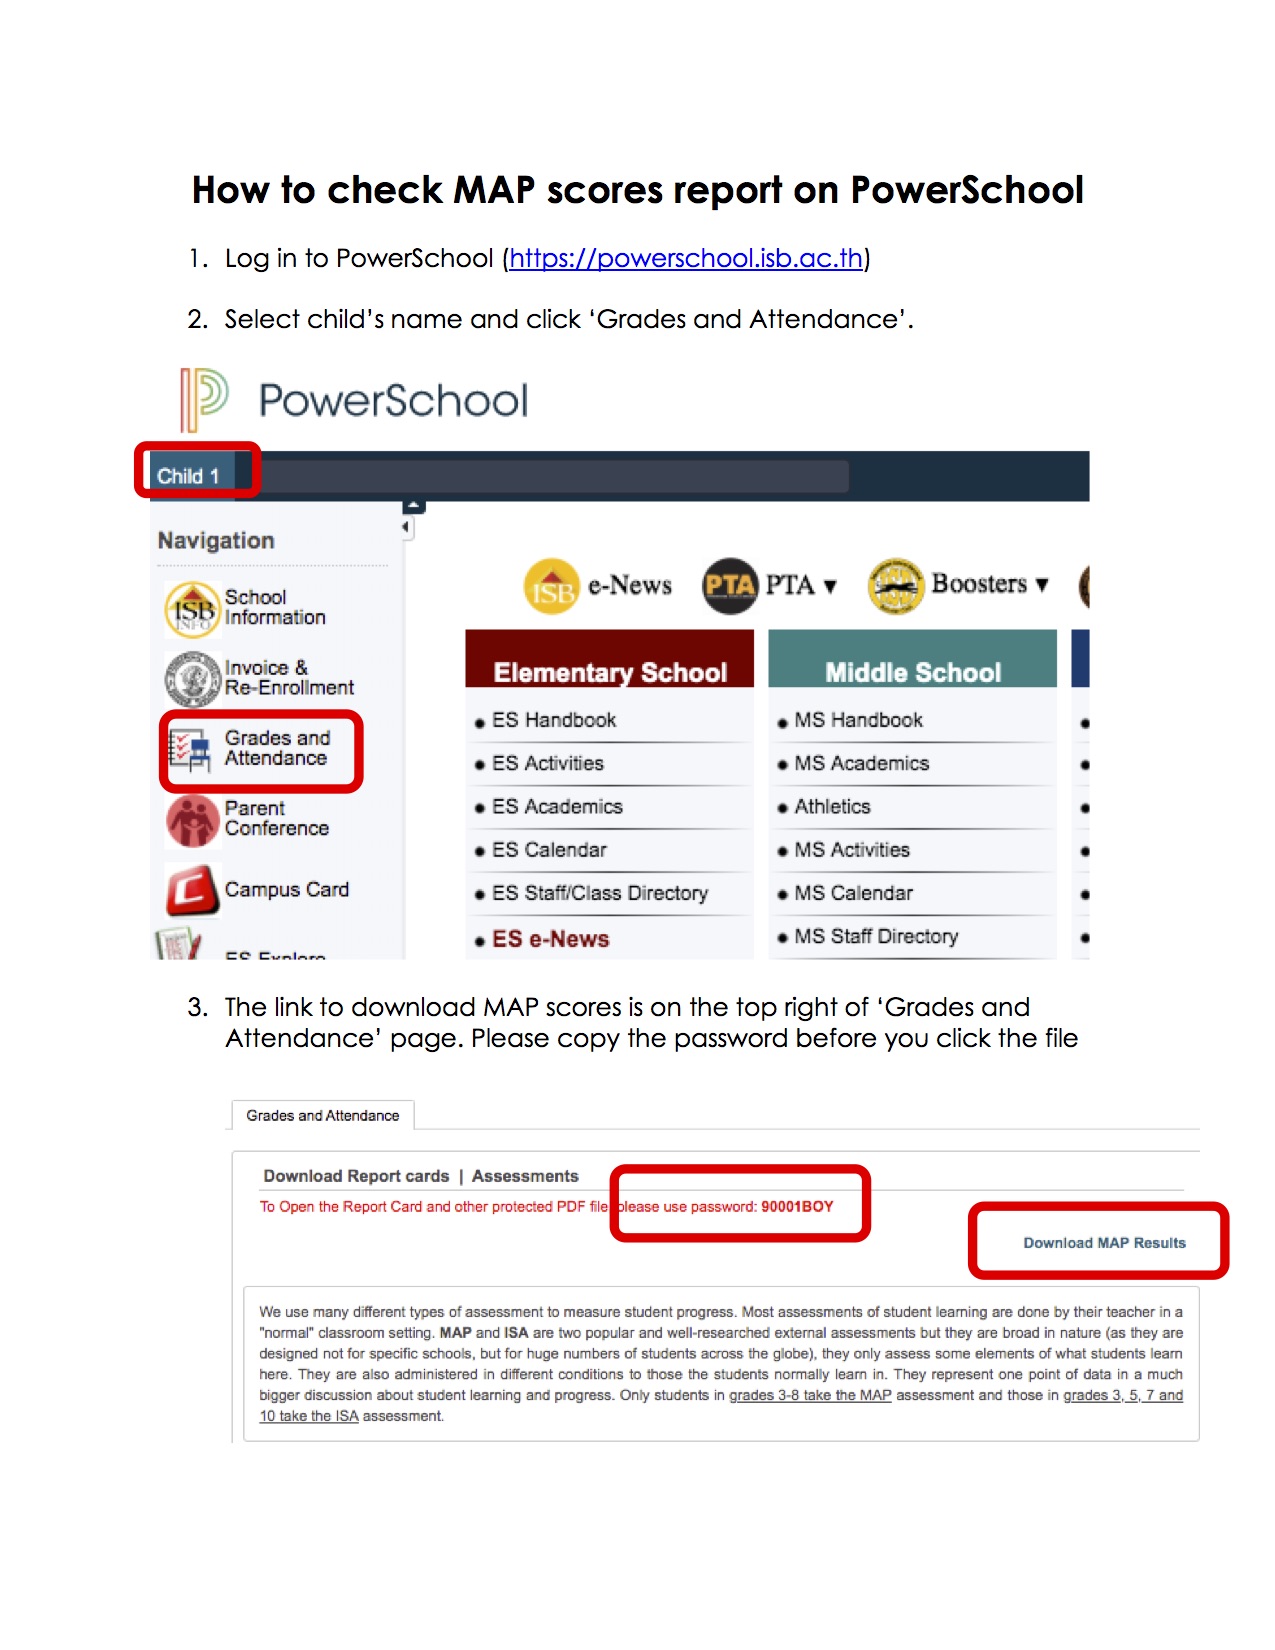 How To Check MAP Scores Report On PowerSchool 